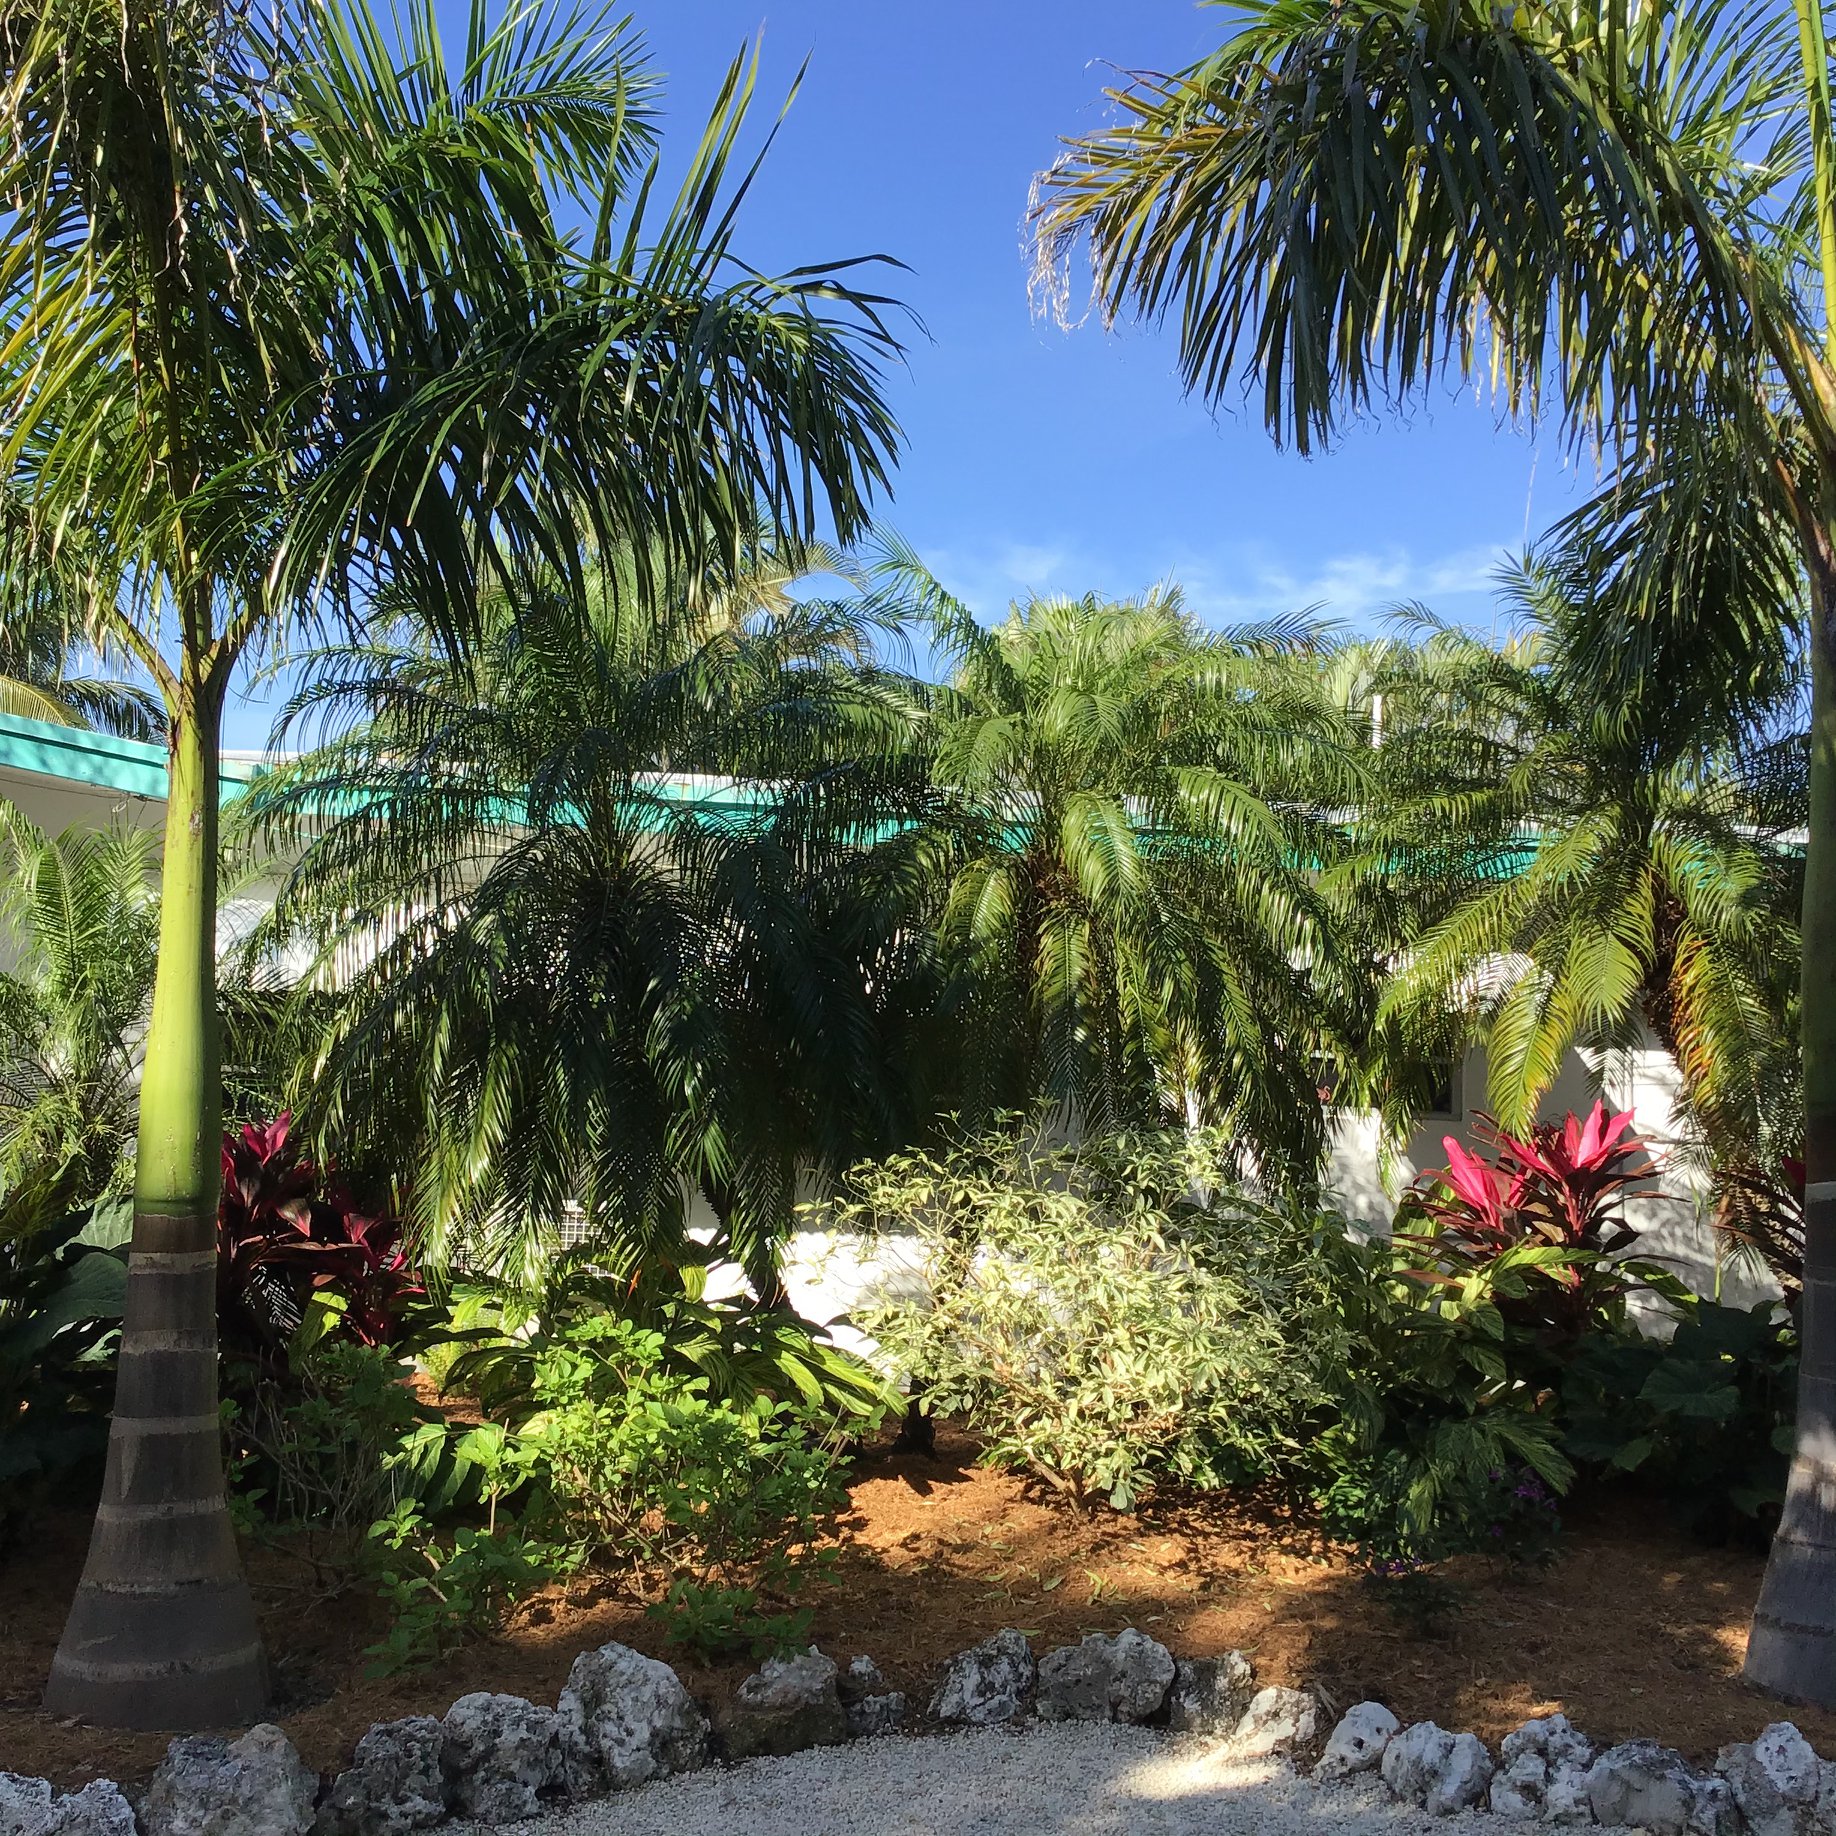 Garden Walk attendees will stroll through spectacular private gardens filled with lush landscaping while gathering inspiration for tropical gardening. 